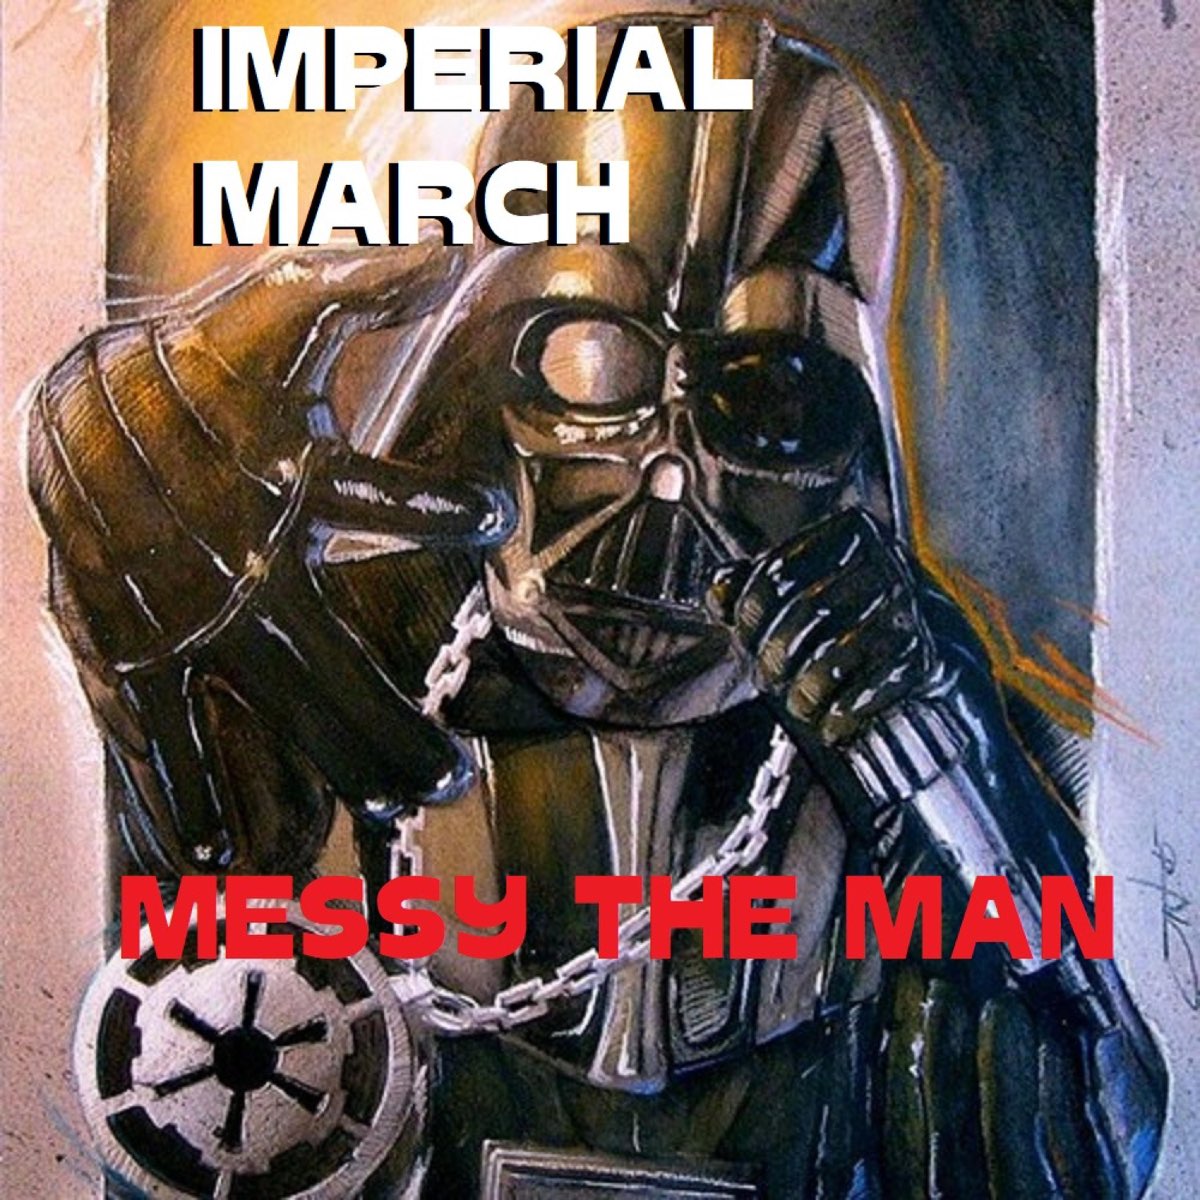 Imperial march 1 hour